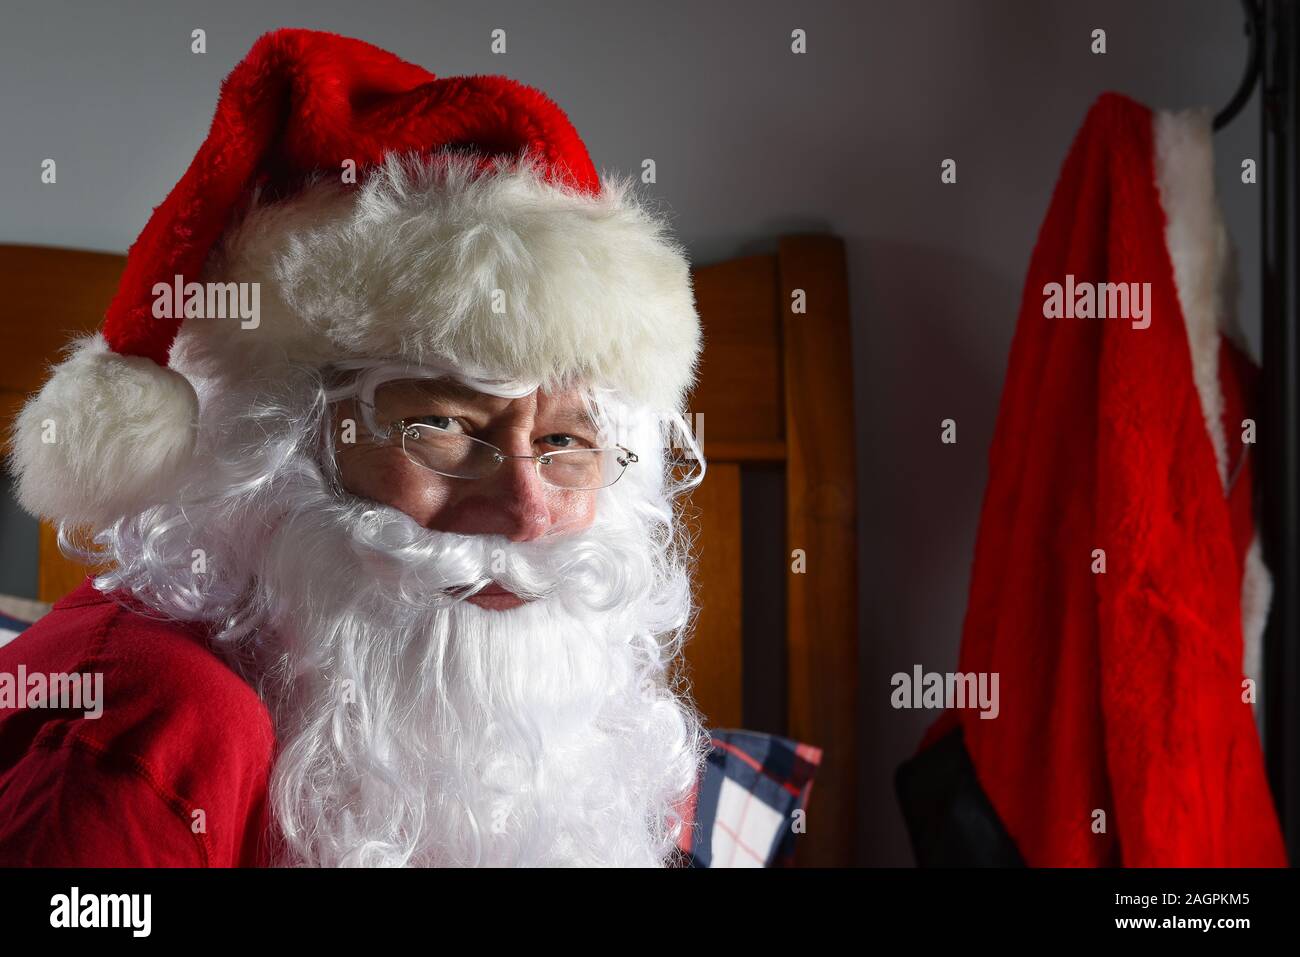 Santa Claus sitting on his bed in his long johns with his Red Suit hanging from a hook in the background. Stock Photo